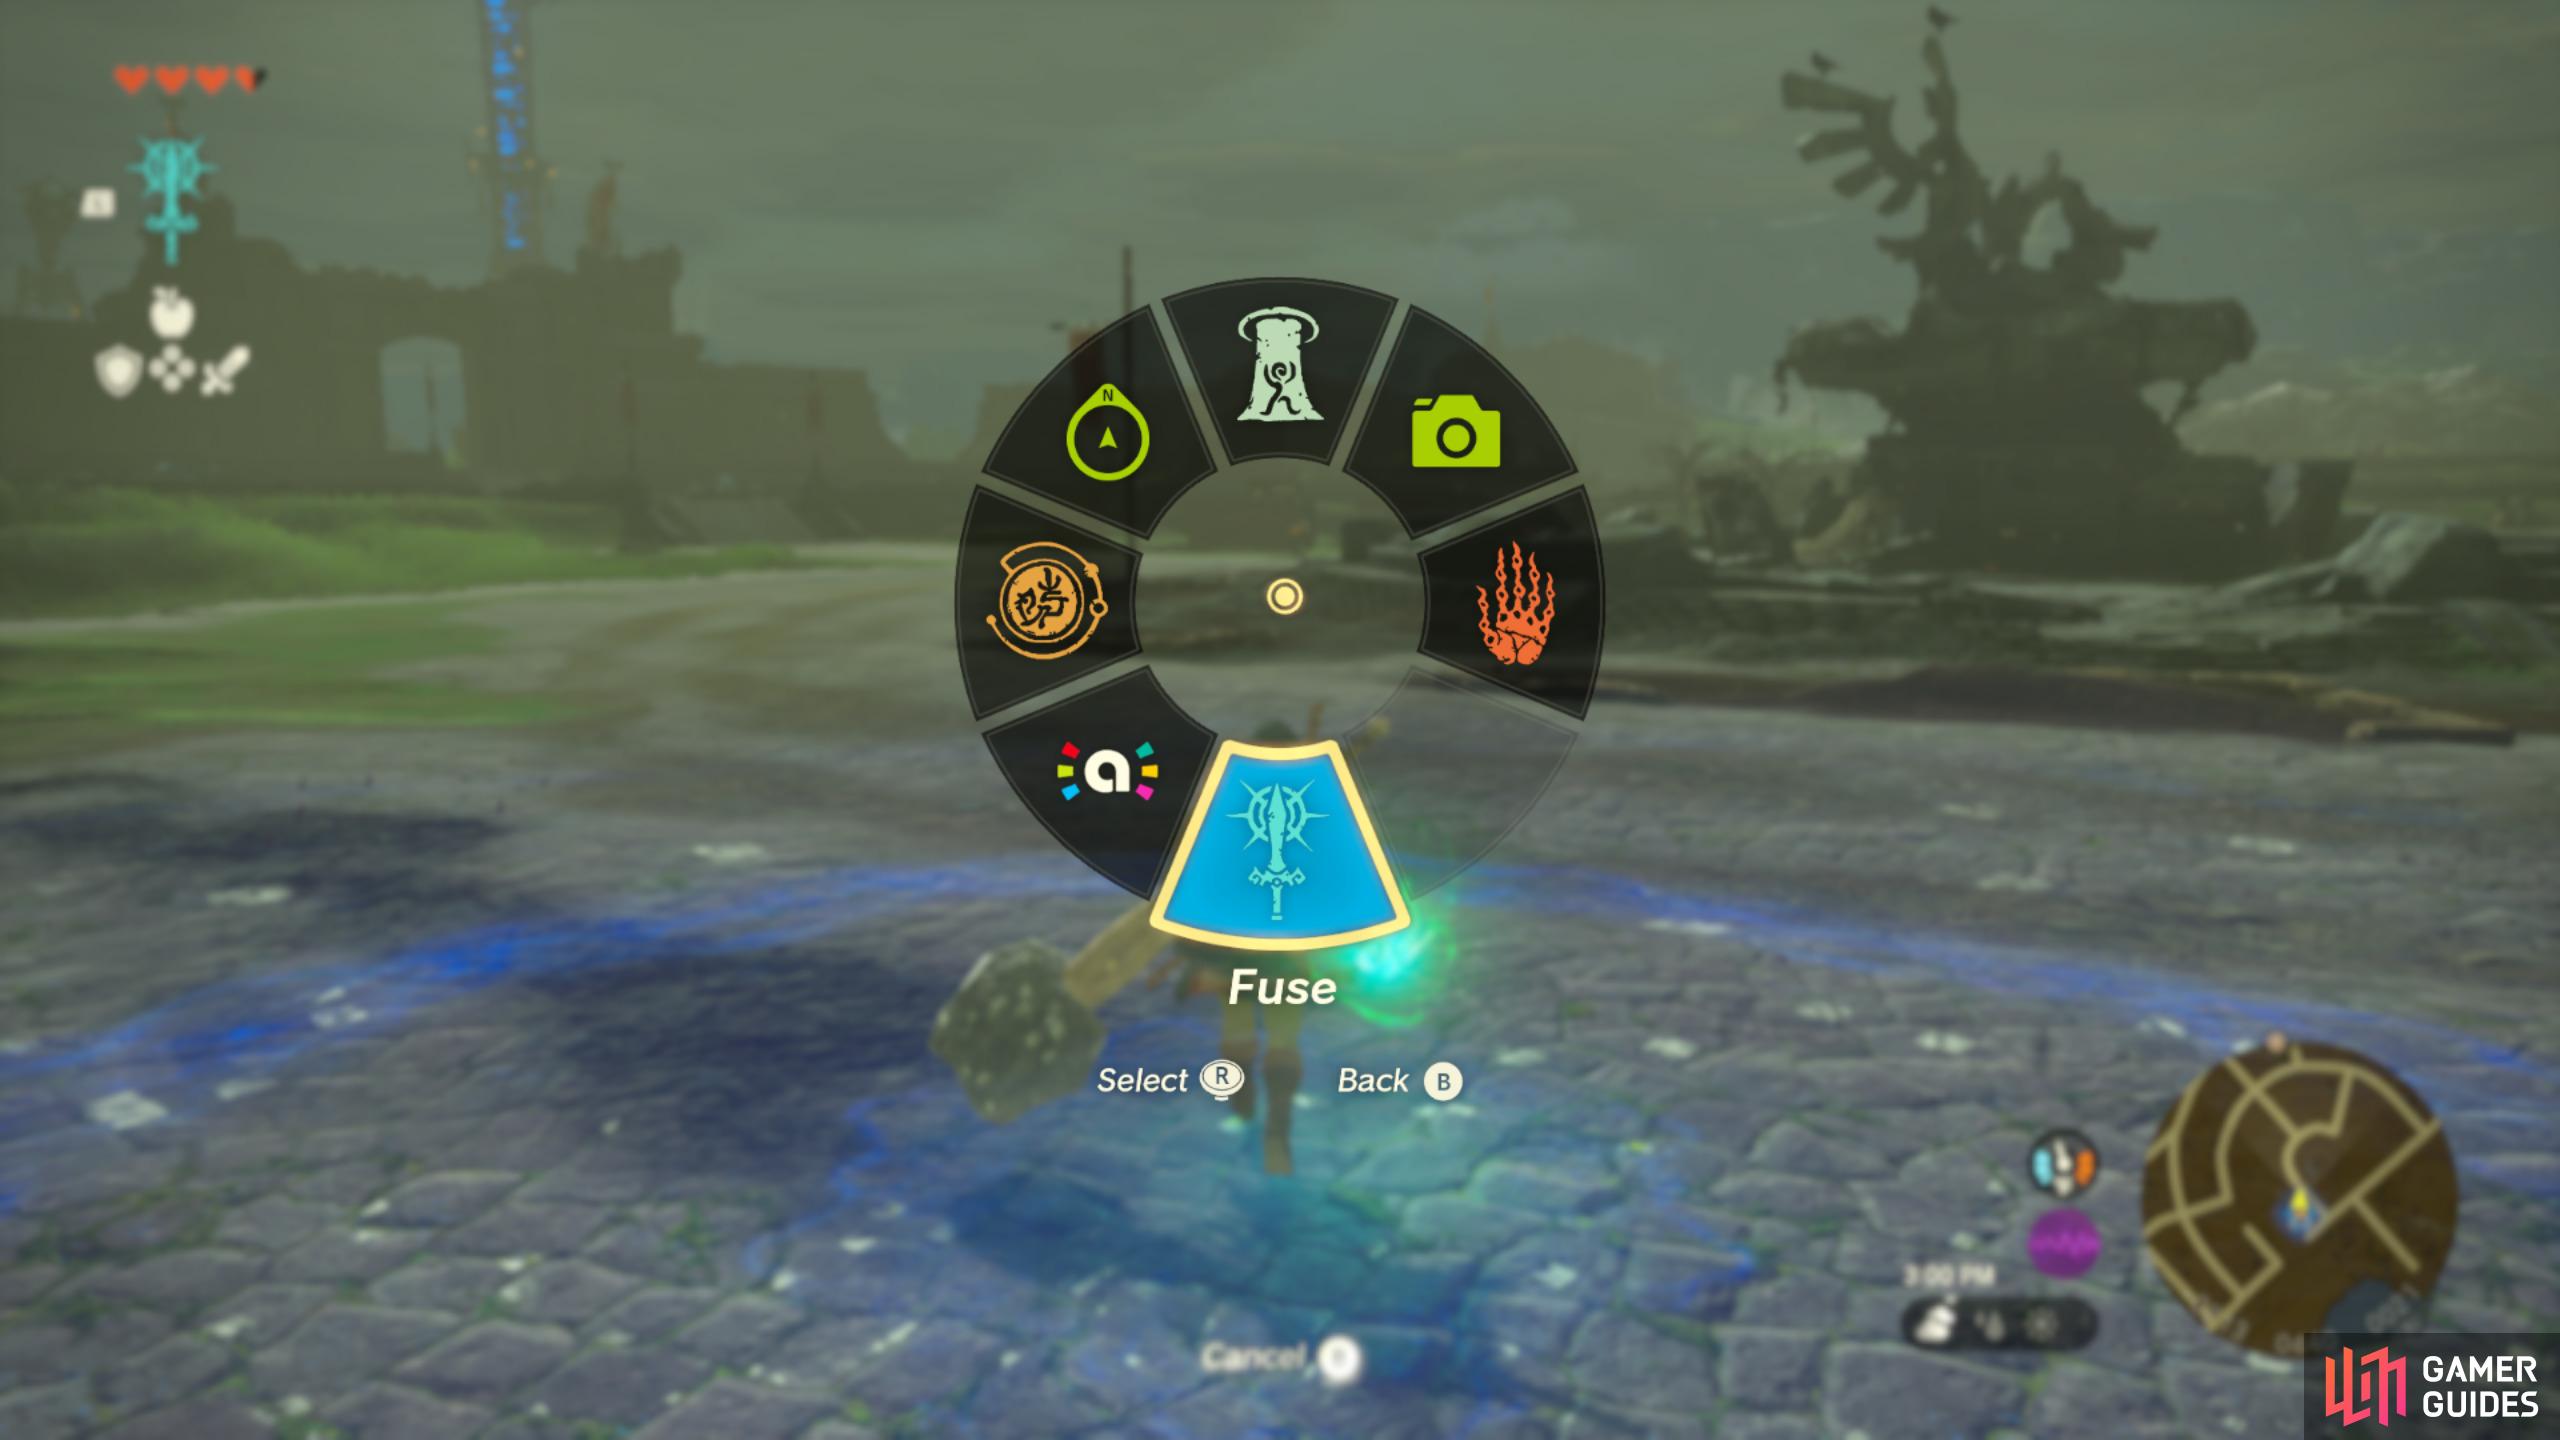 You can access any of the abilities by pressing L to bring up the wheel.